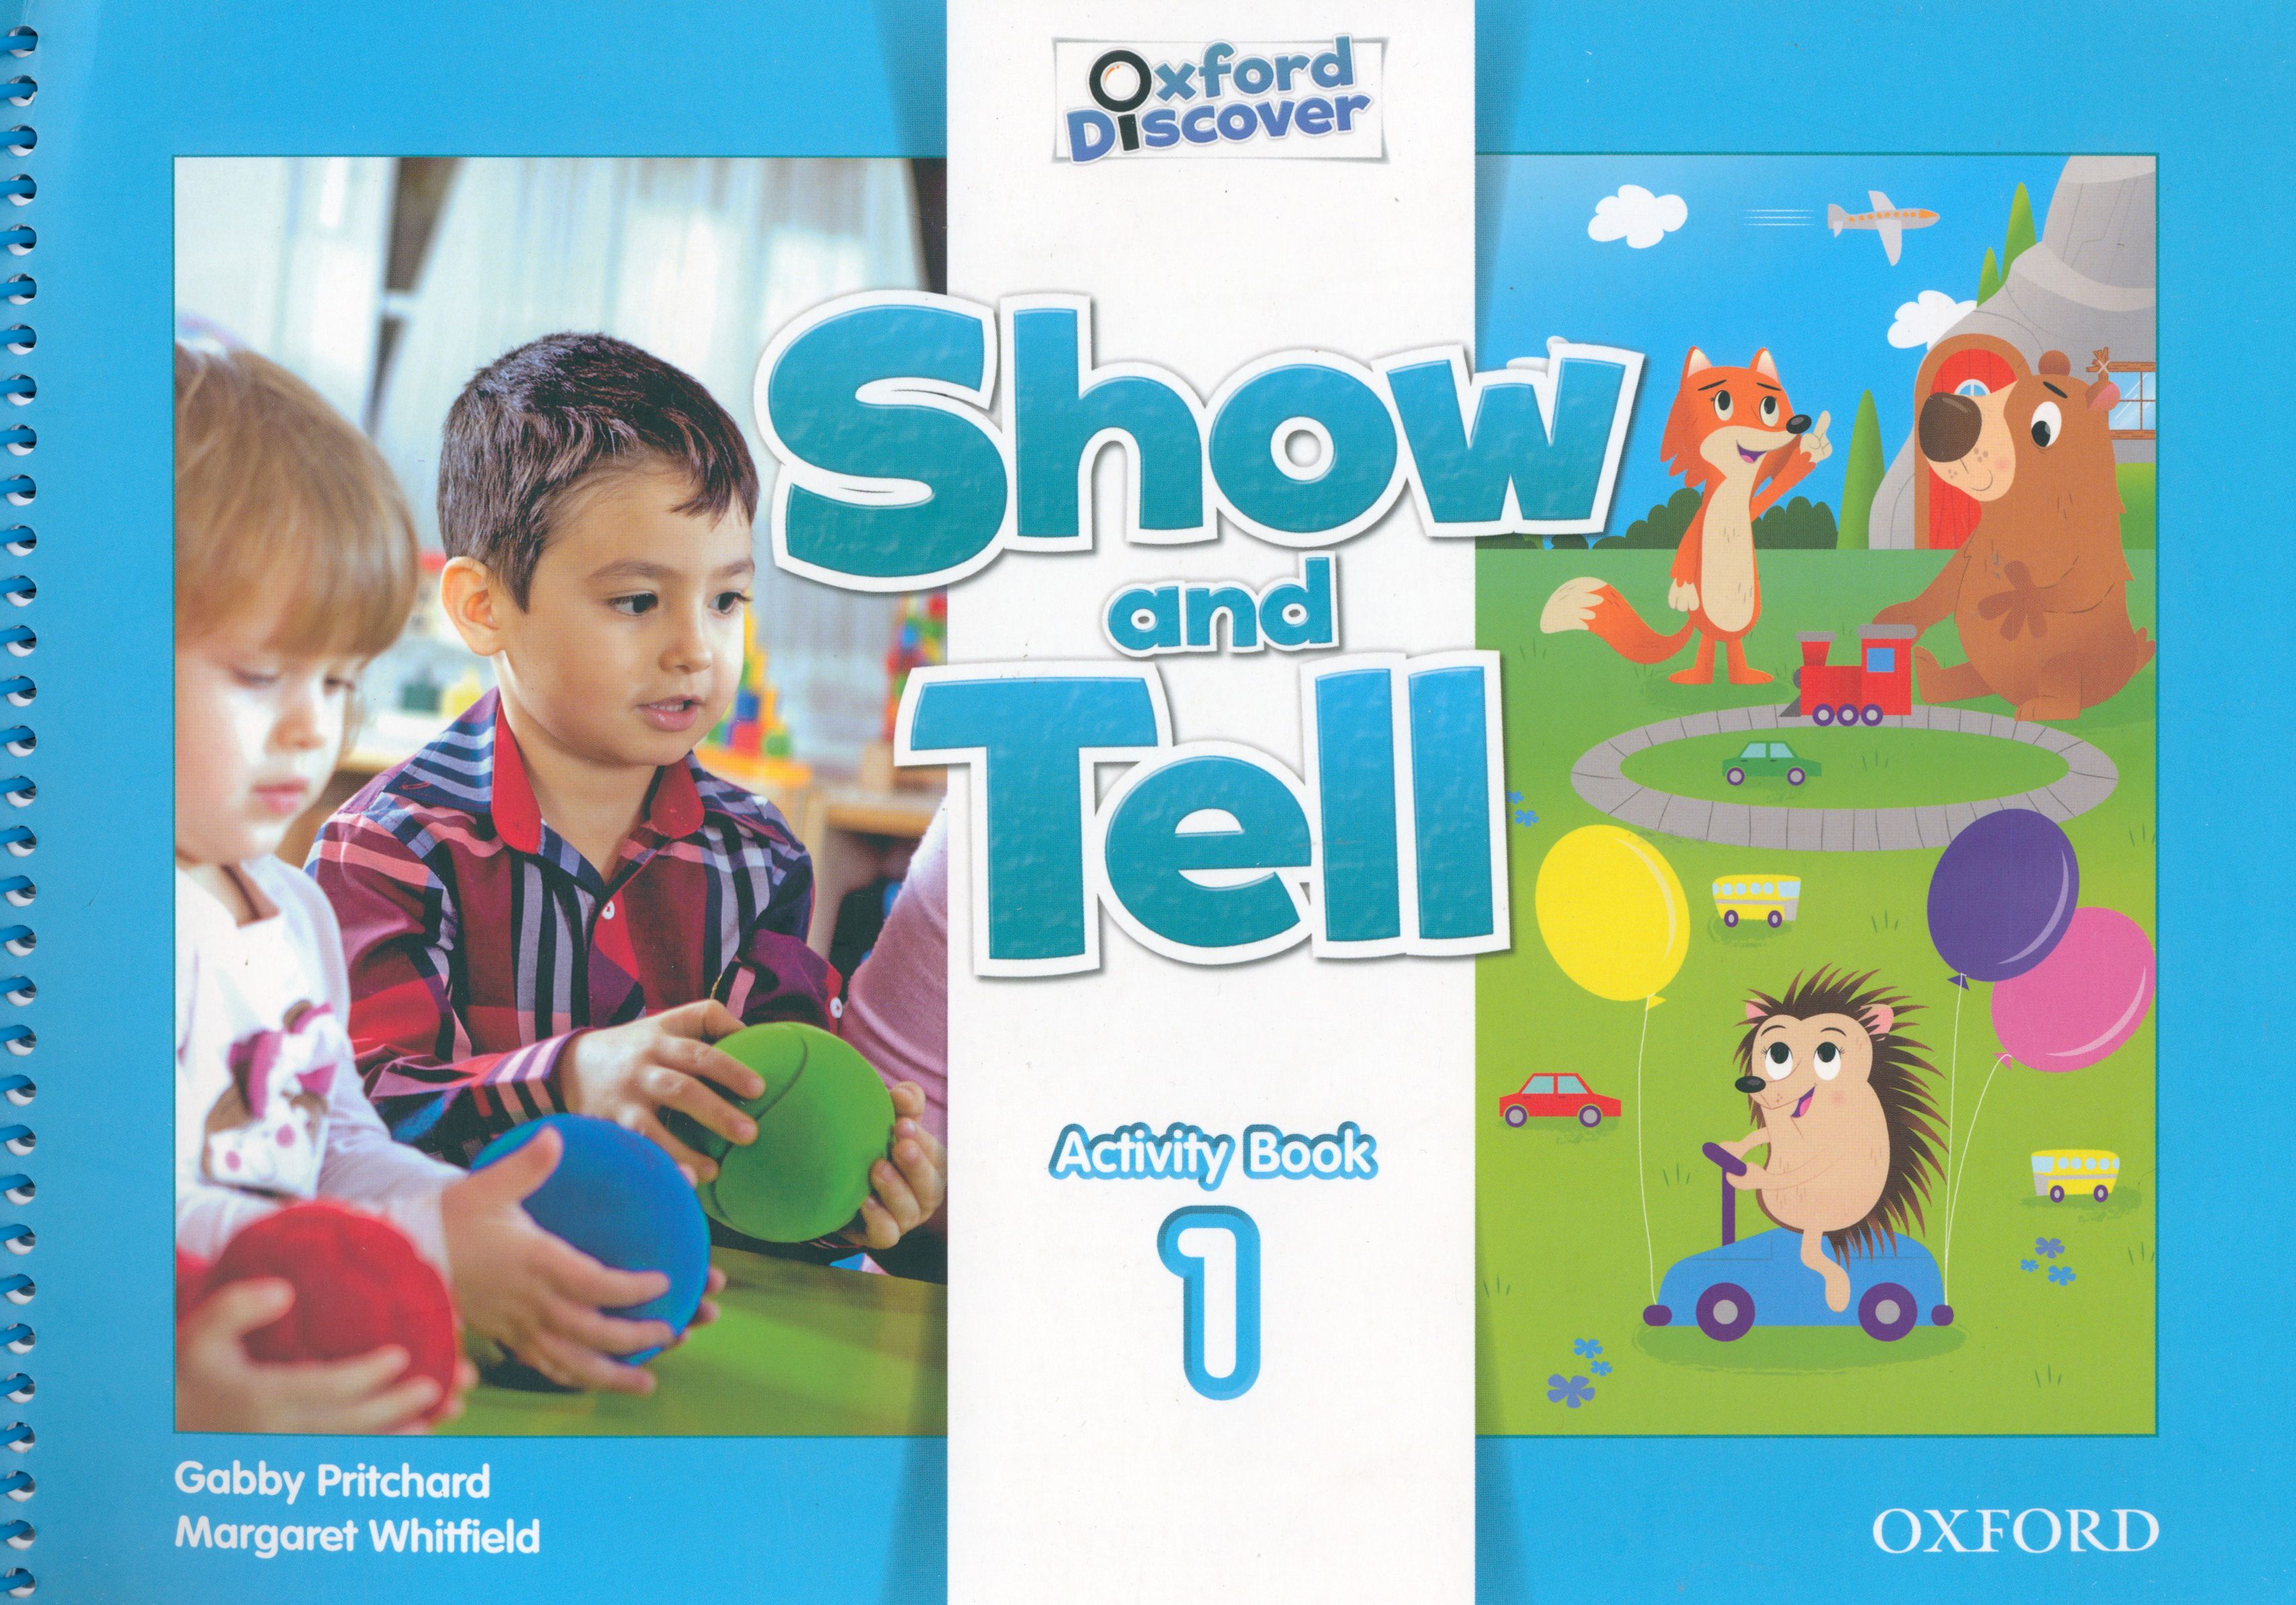 1 activity ru. Show and tell 1 Oxford. Show and tell 1 activity book. Show tell учебник. Oxford discover show and tell.